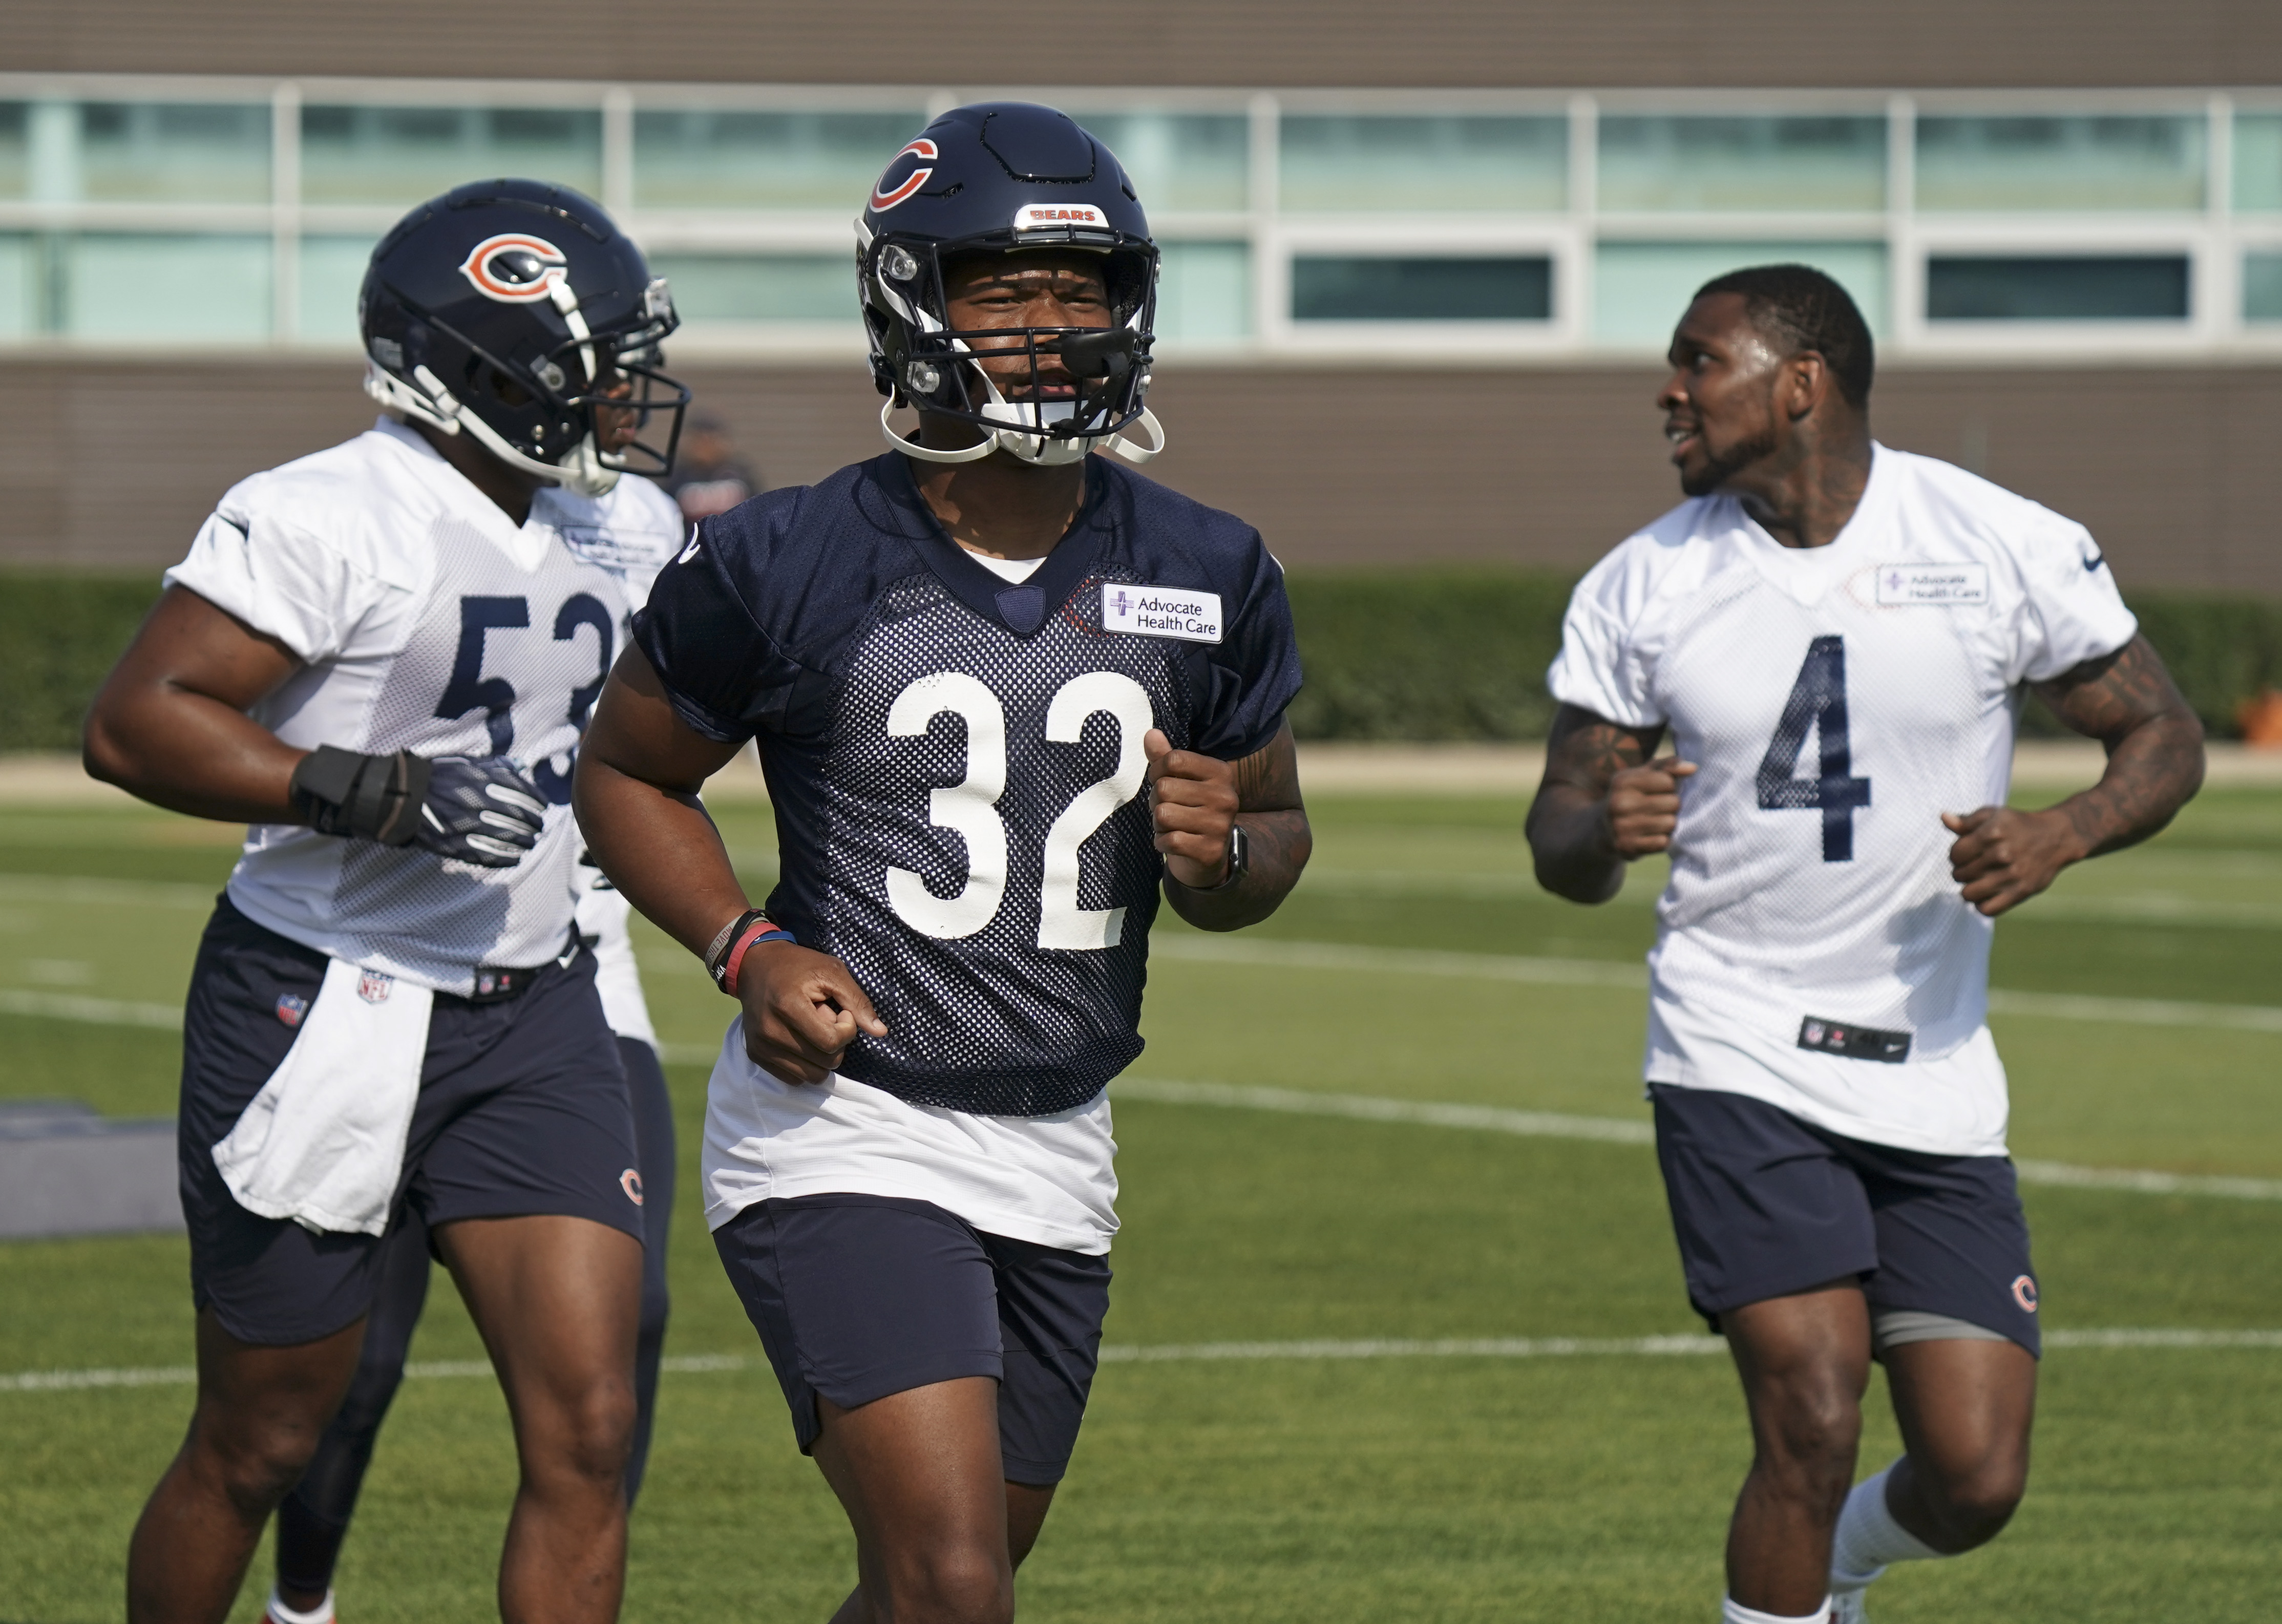 Ledarius Mack #53, David Montgomery #32, and Eddie Jackson #4 of the Chicago Bears run on the field during training camp at Halas Hall on July 29, 2021 in Lake Forest, Illinois.